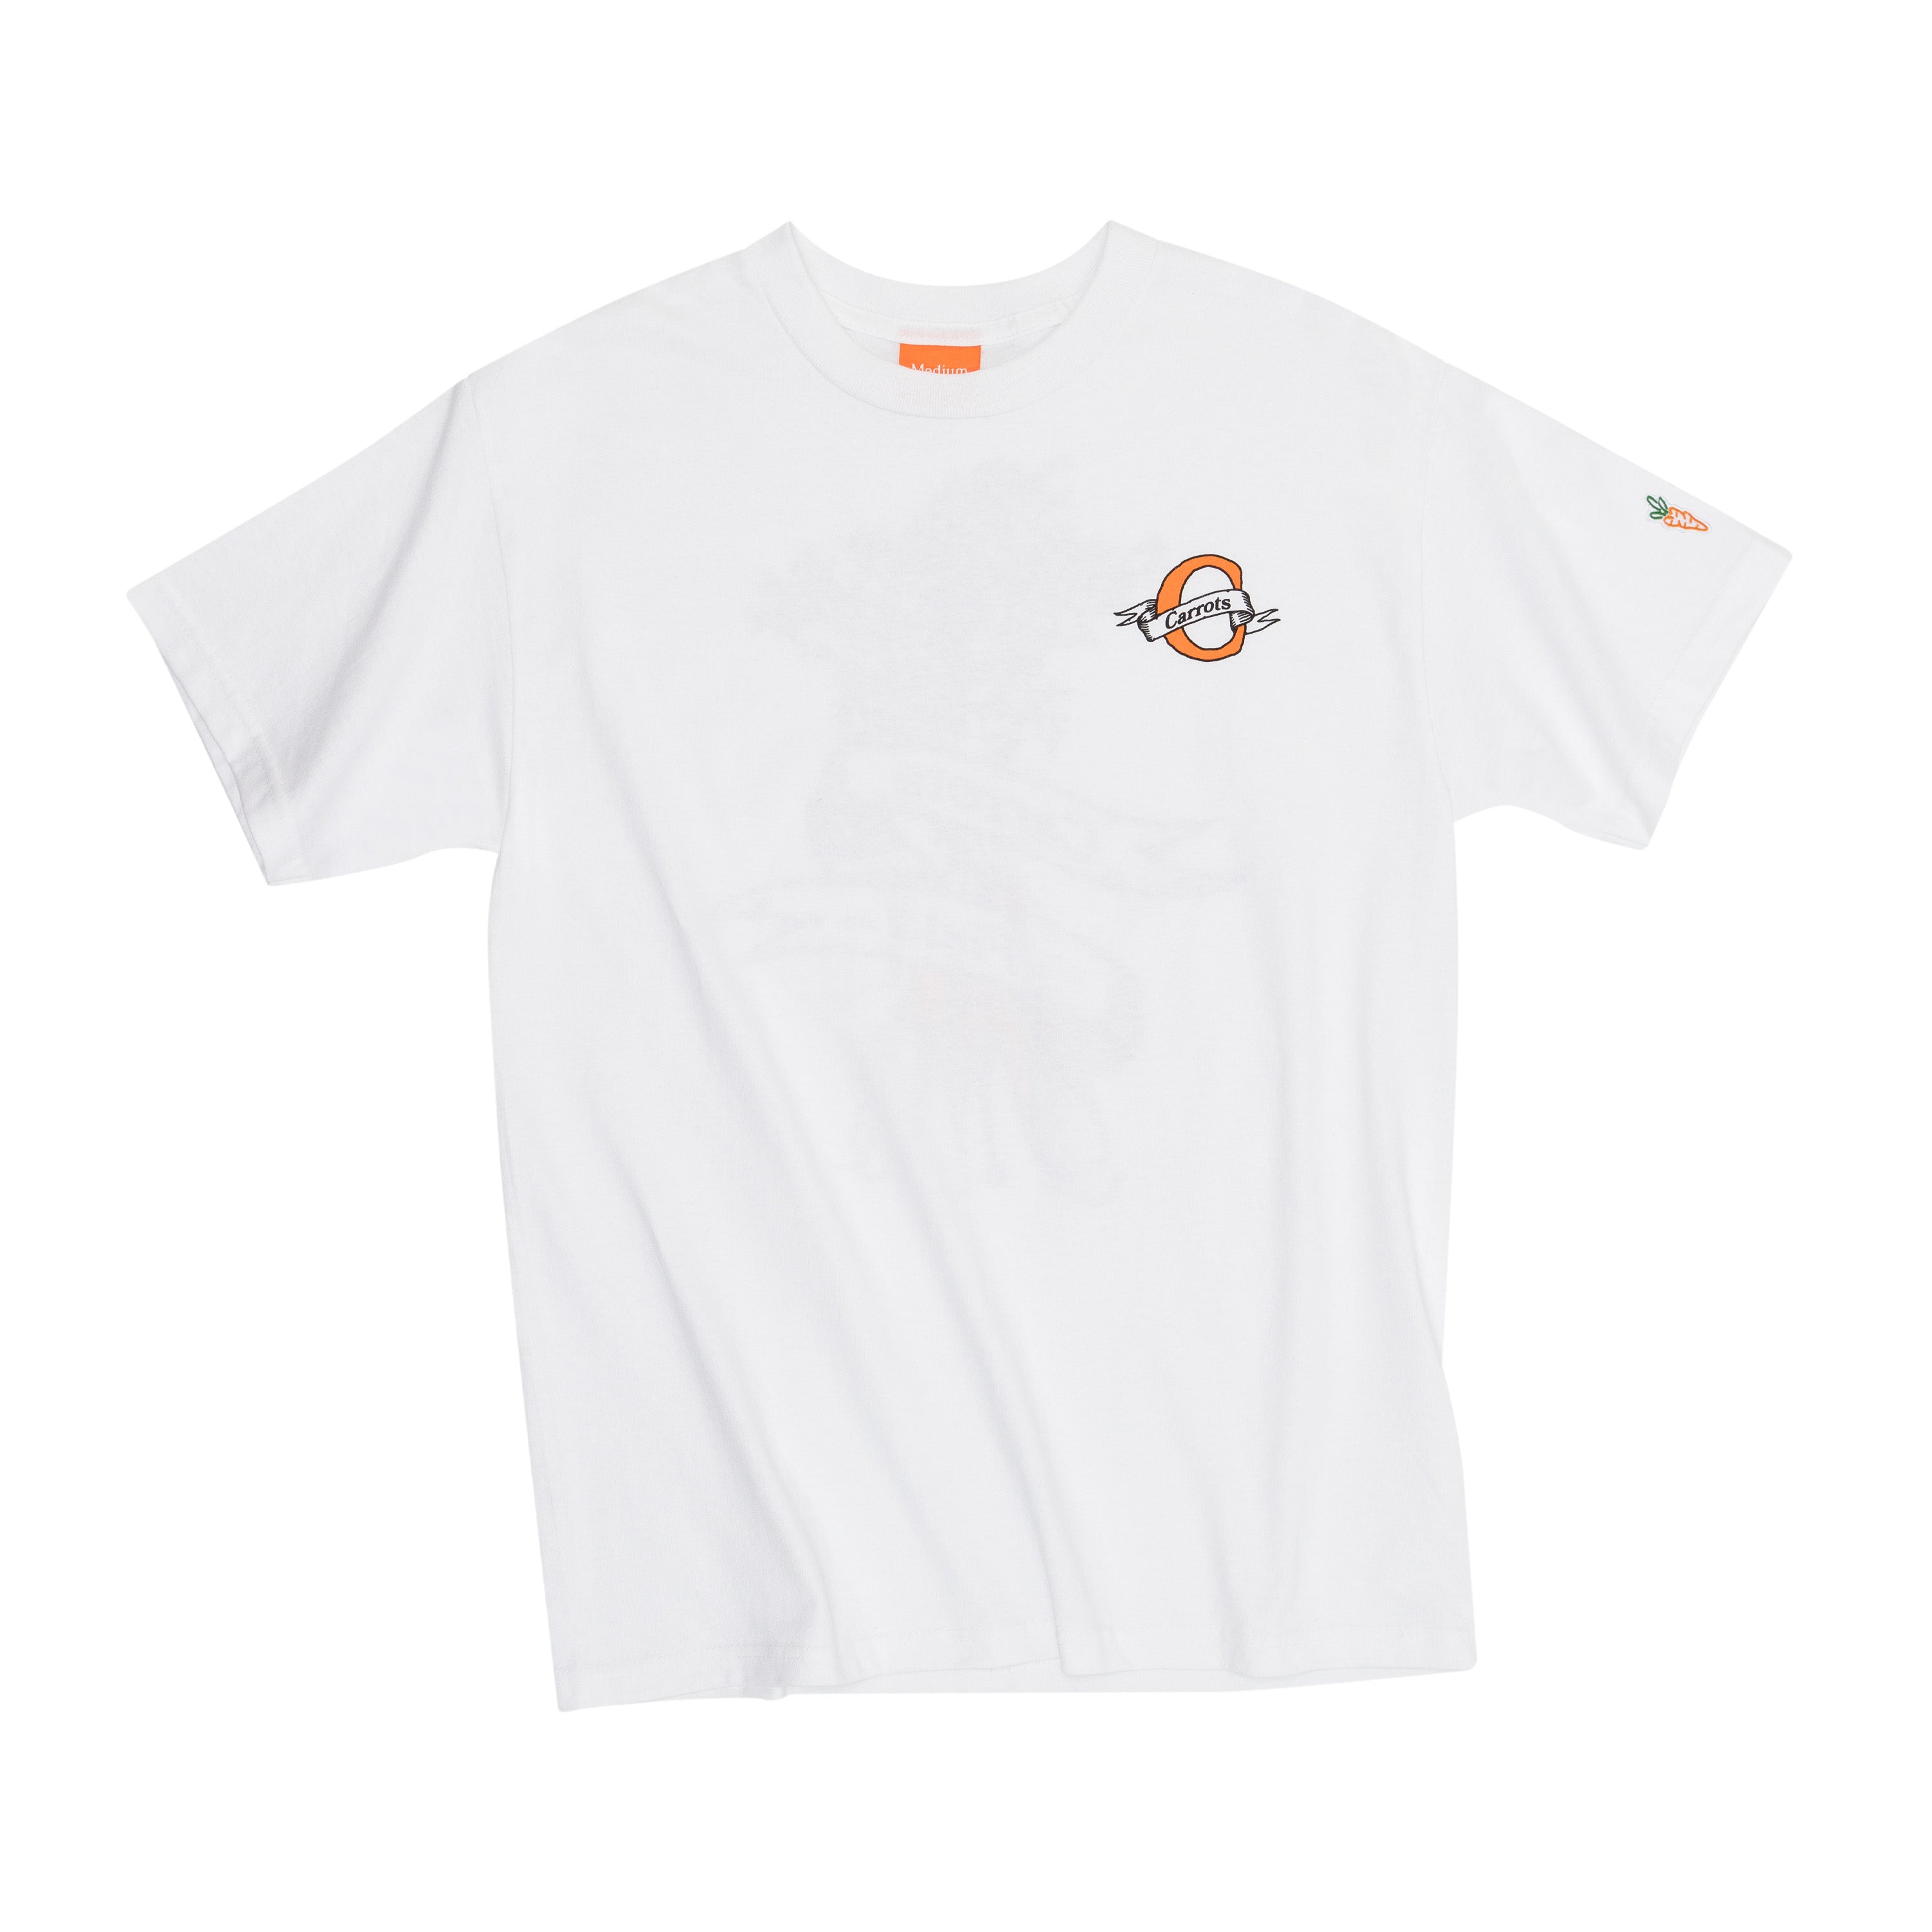 BANNER TEE - WHITE | HOLIDAY QS 23\' | Carrots by Anwar Carrots – Carrots By  Anwar Carrots